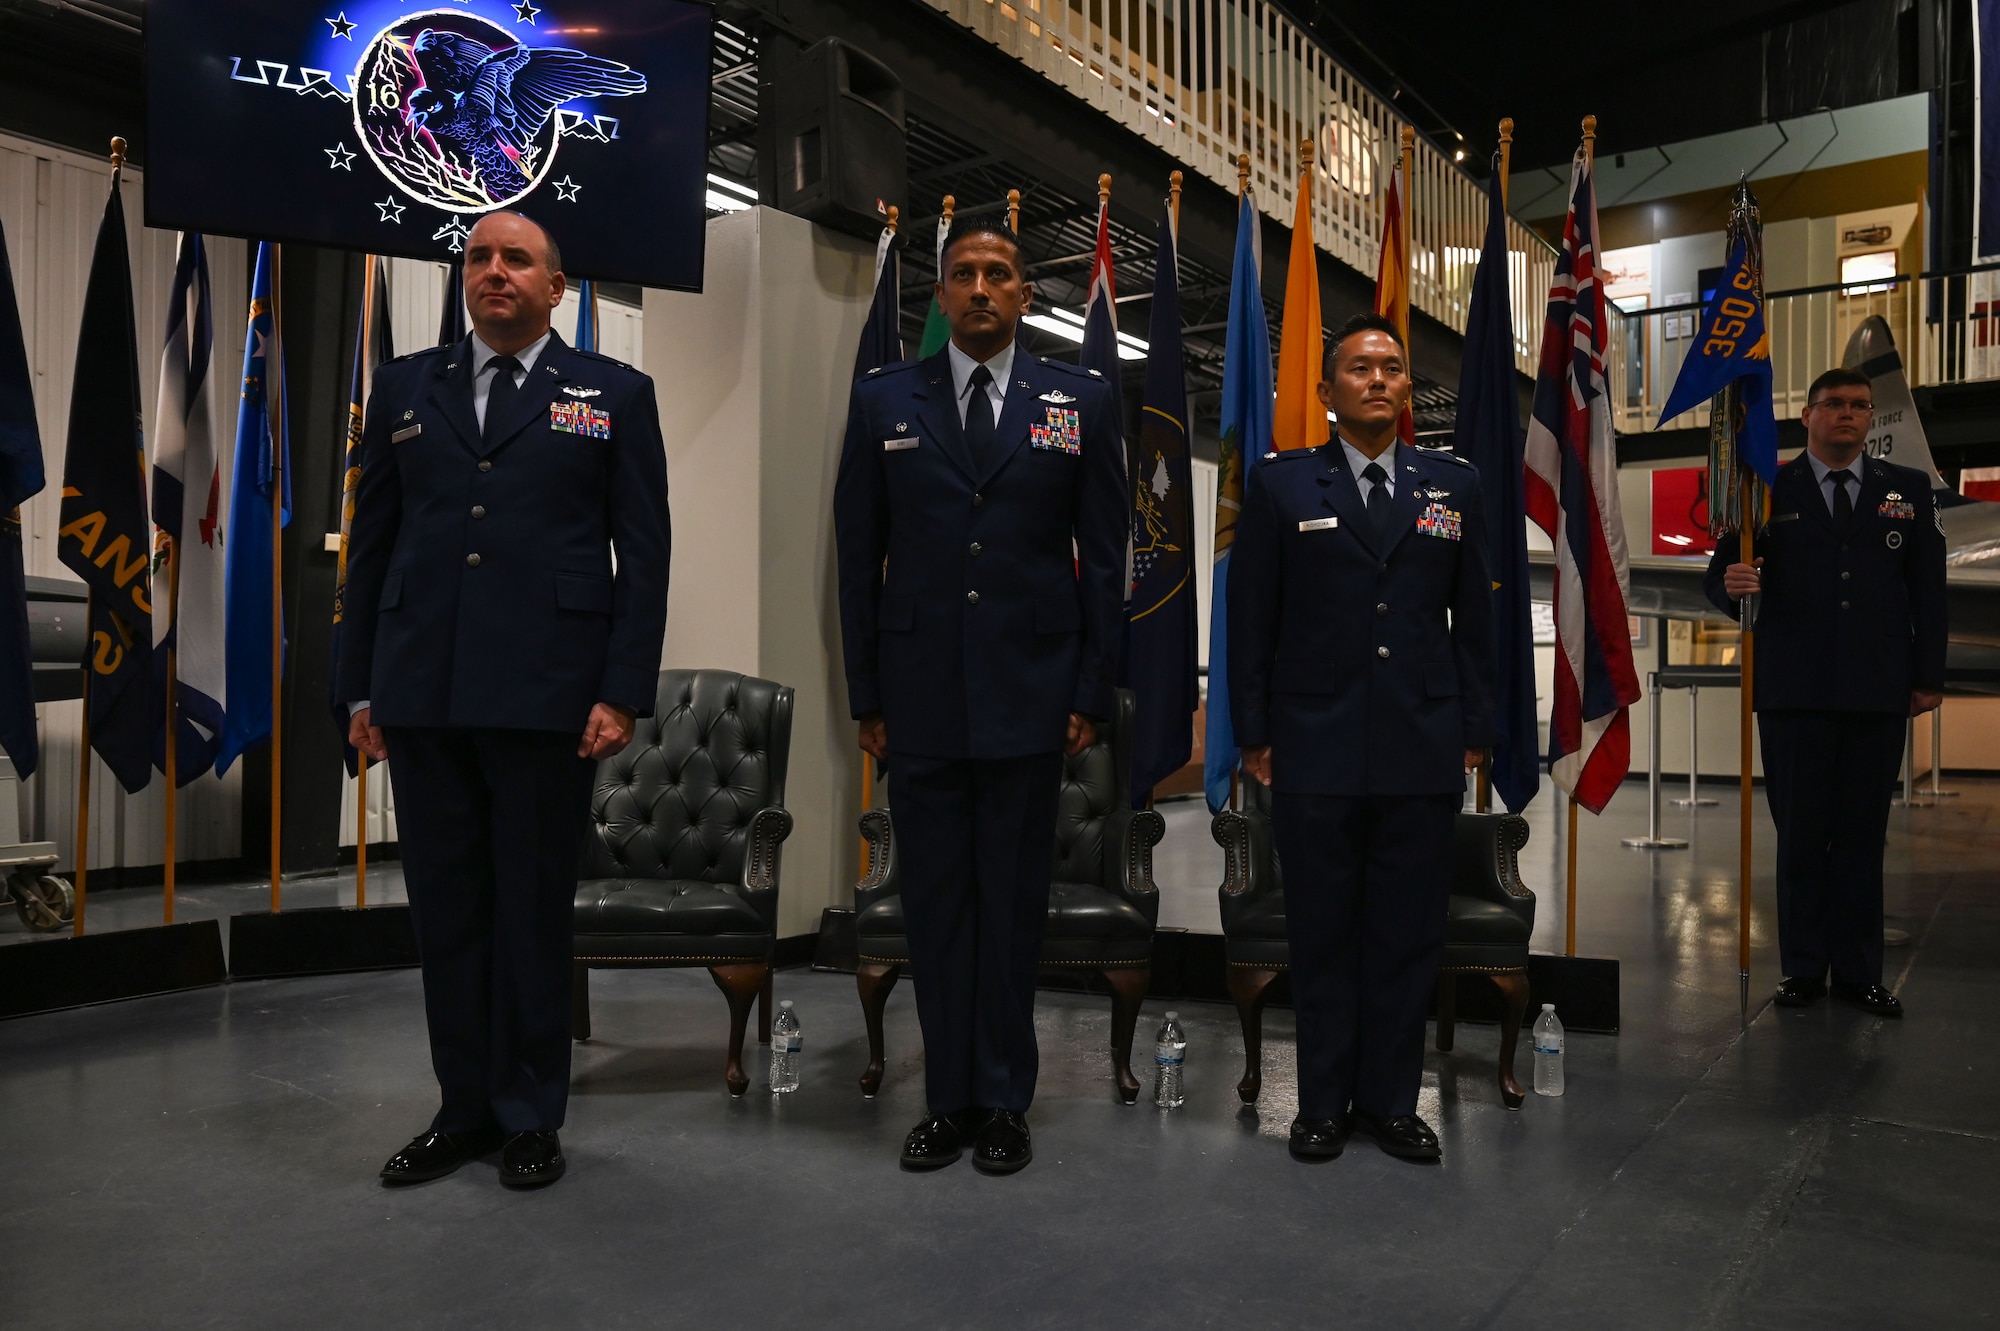 U.S. Air Force Col. Robert P. Cocke, 350th Spectrum Warfare Group commander, left, Lt. Col. Ajay K. Giri, 16th Electronic Warfare Squadron (EWS) outgoing commander, center, and Lt. Col. Chad R. Nishizuka, 16th EWS incoming commander, right stand at attention during a change of command at Eglin Air Force Base, June 6, 2023. The mission of the 16th EWS is to develop, test, validate, and field electromagnetic warfare capabilities for the warfighter. (U.S. Air Force photo by Staff Sgt. Ericka A. Woolever)